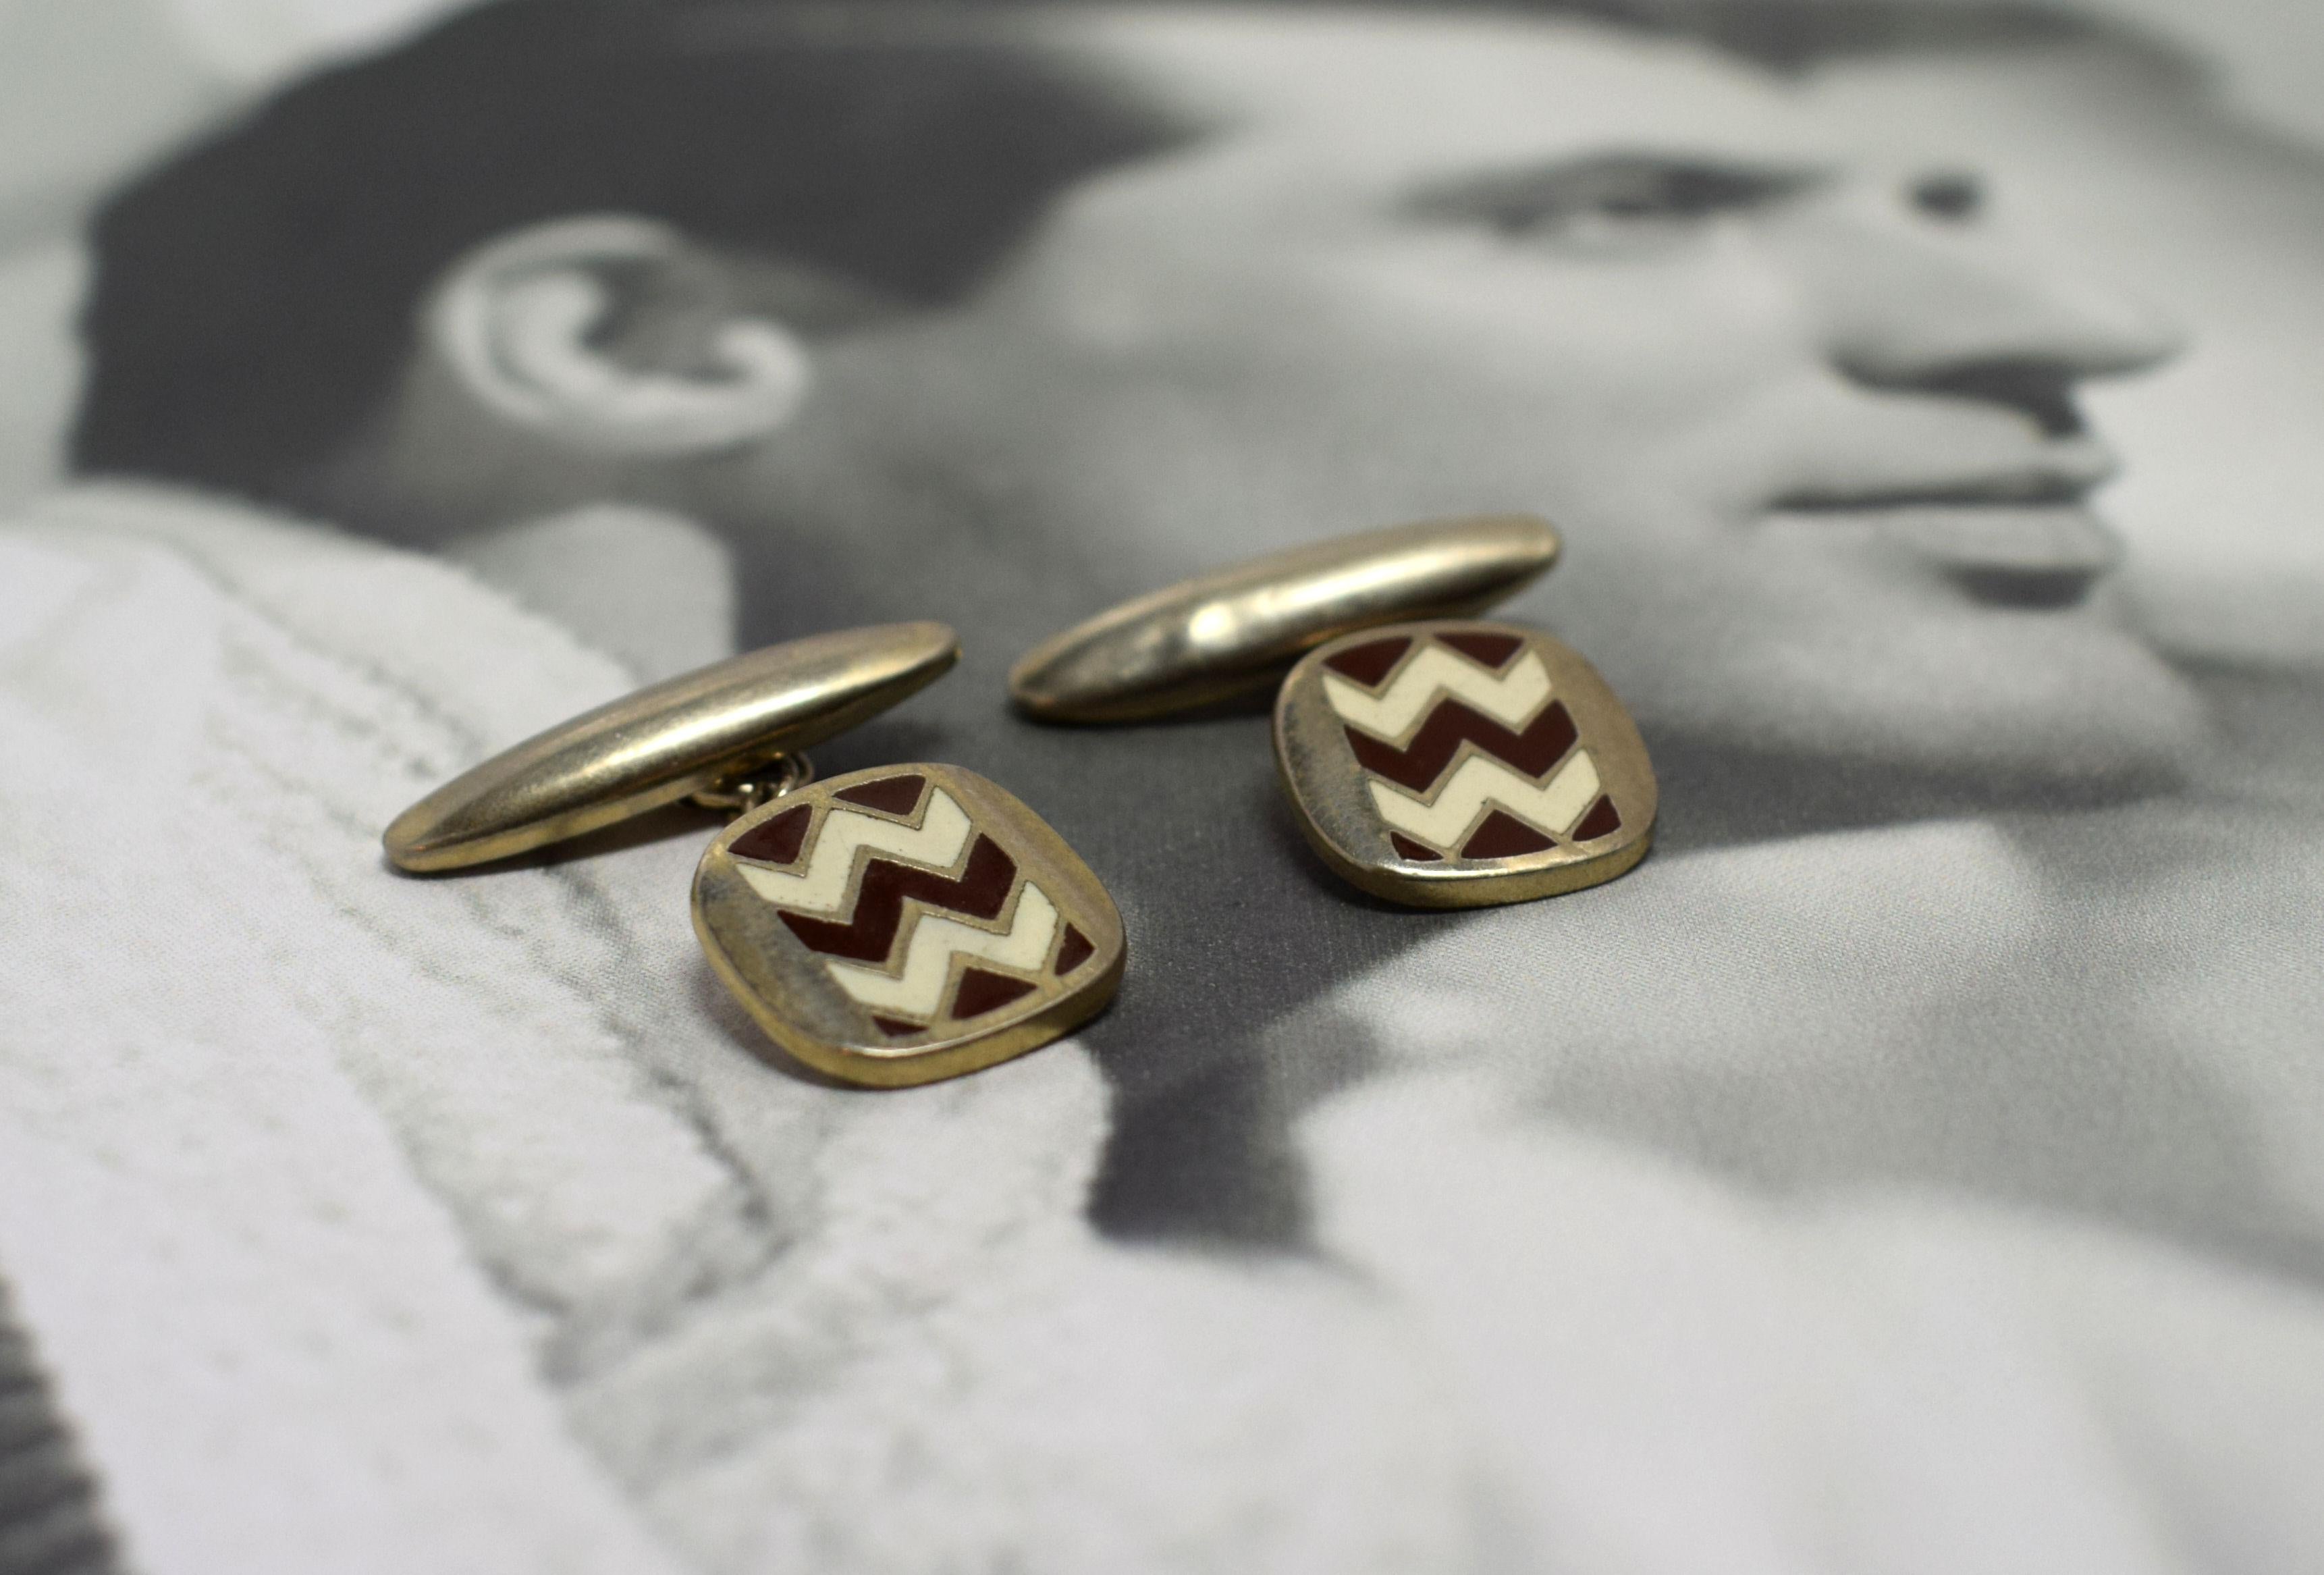 For your consideration is this fabulous pair of English Art Deco cufflinks in gold tone metal and enamel in a zig zagging pattern dating to the 1930's. Great styling and colour, can't be confused with any other era can they? Condition is great with